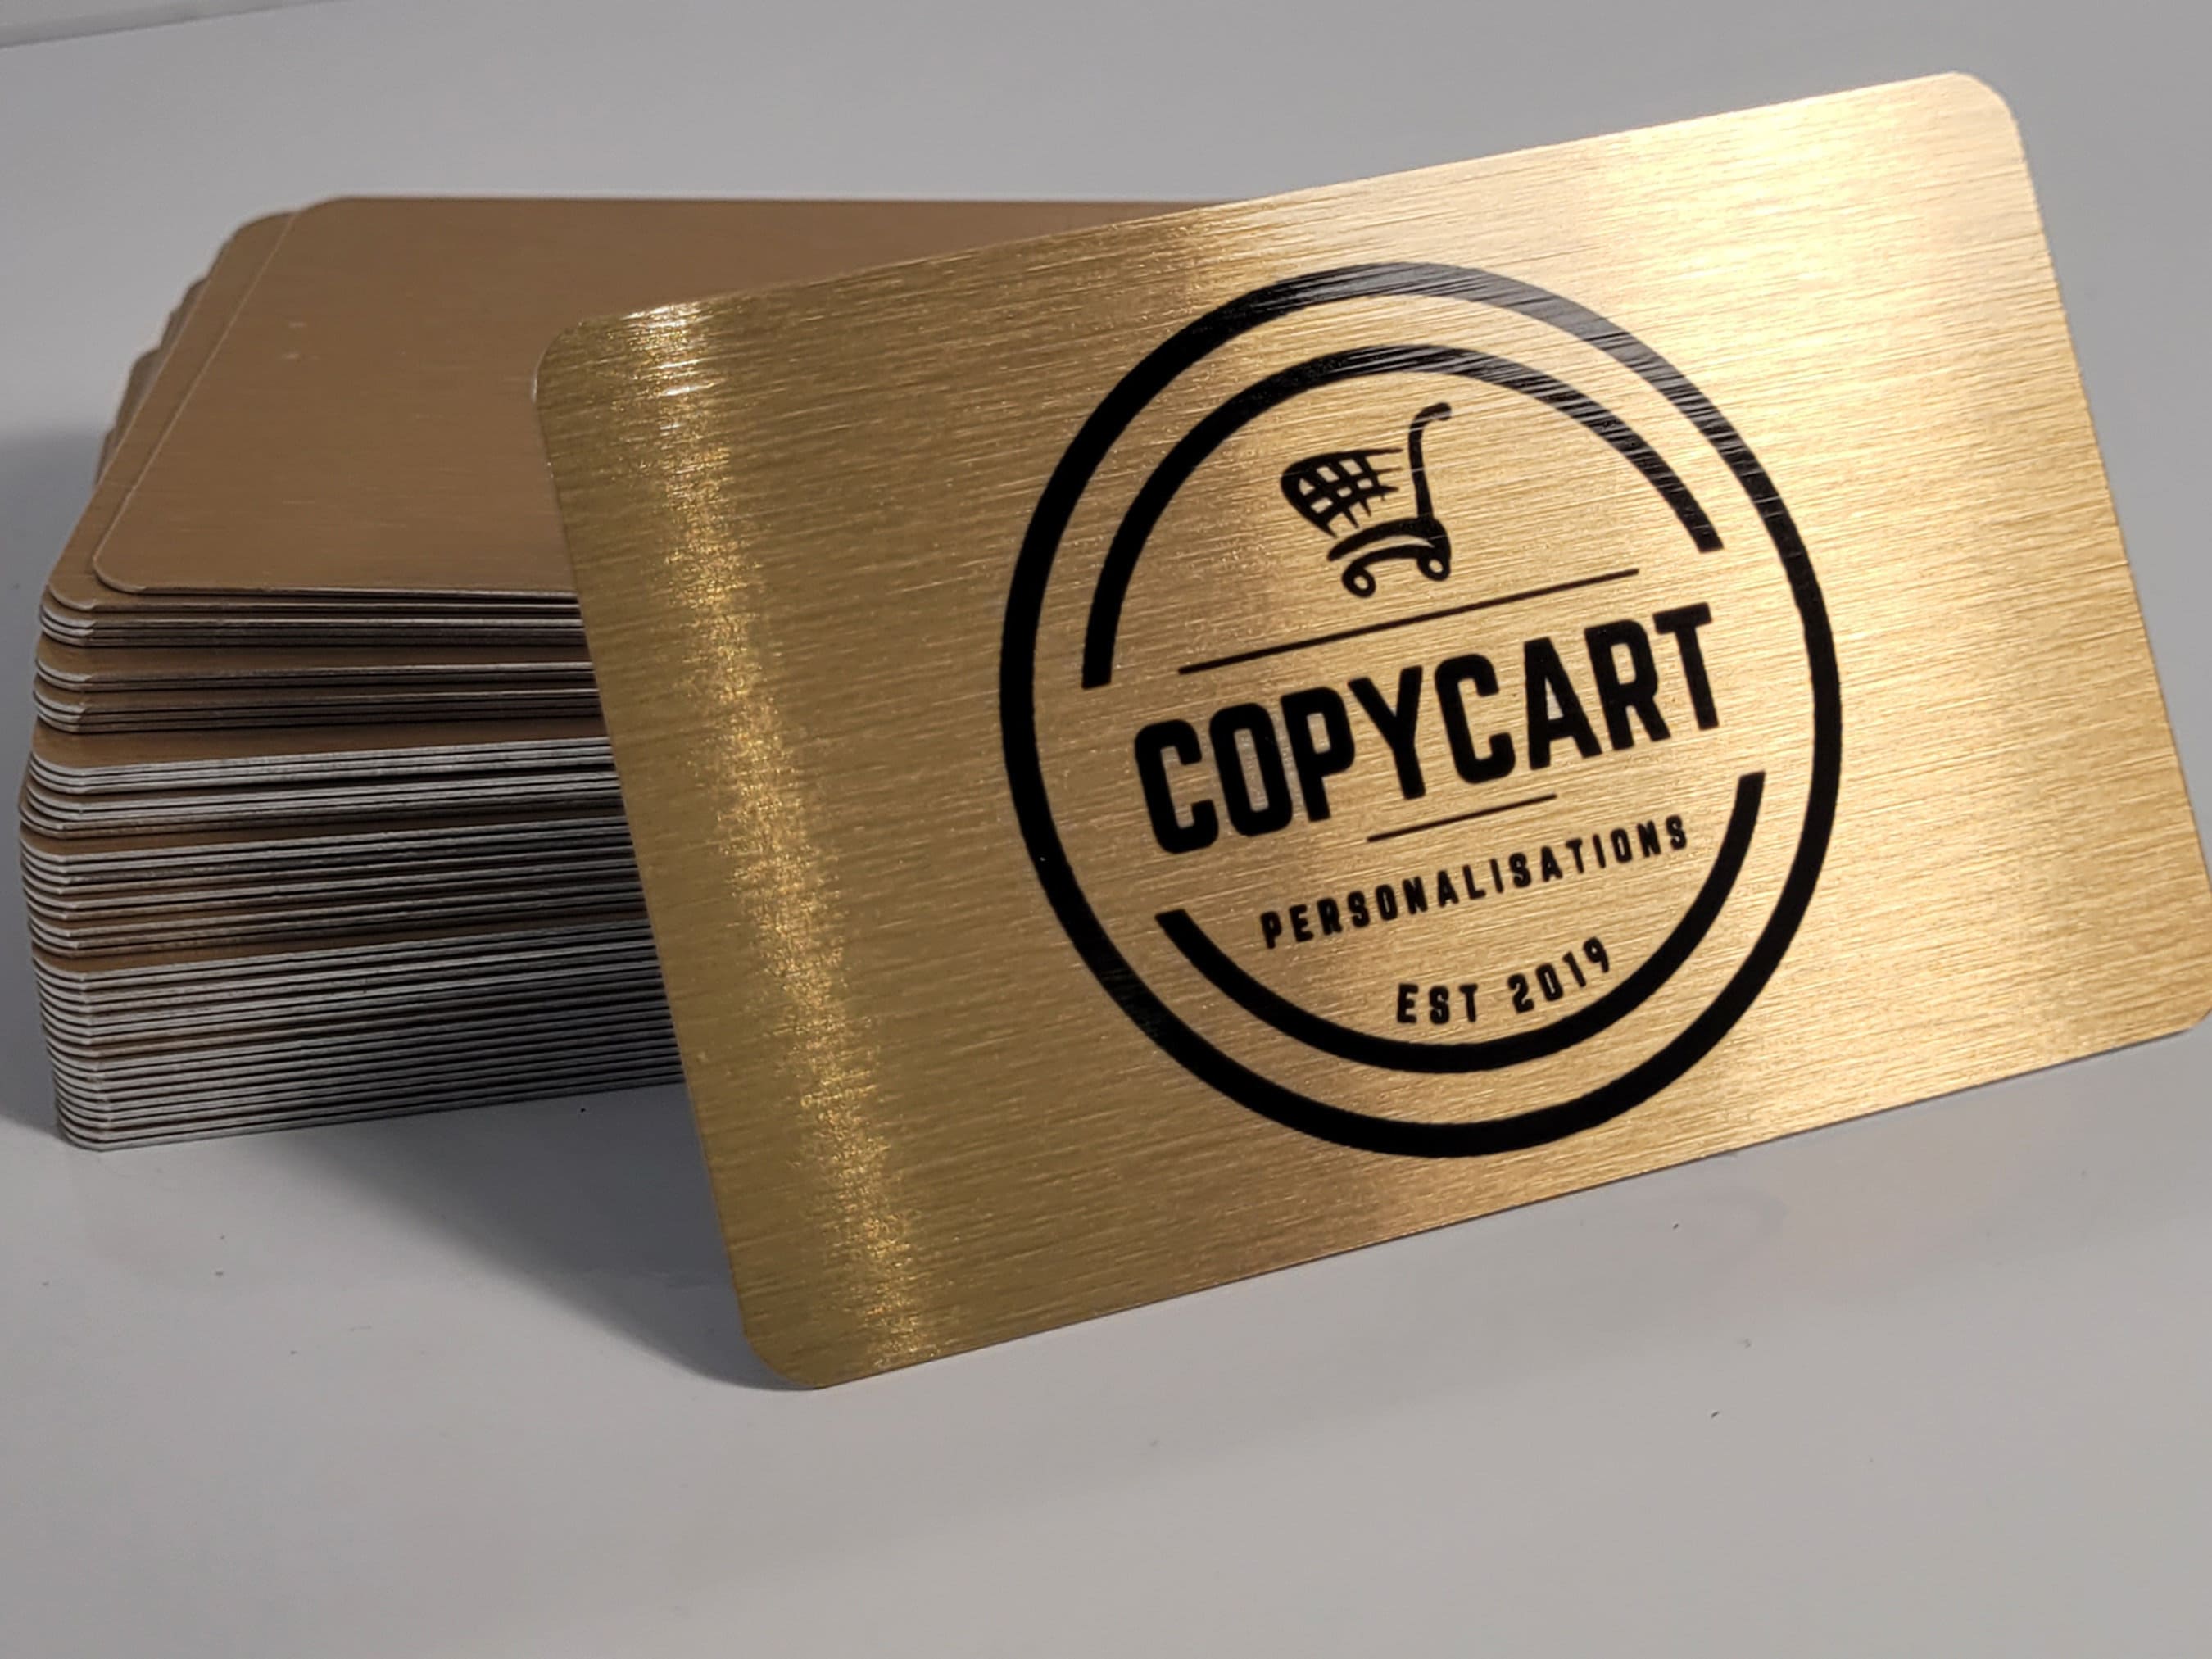 Stunning Anodized Aluminium Business Cards for Decor and Souvenirs 